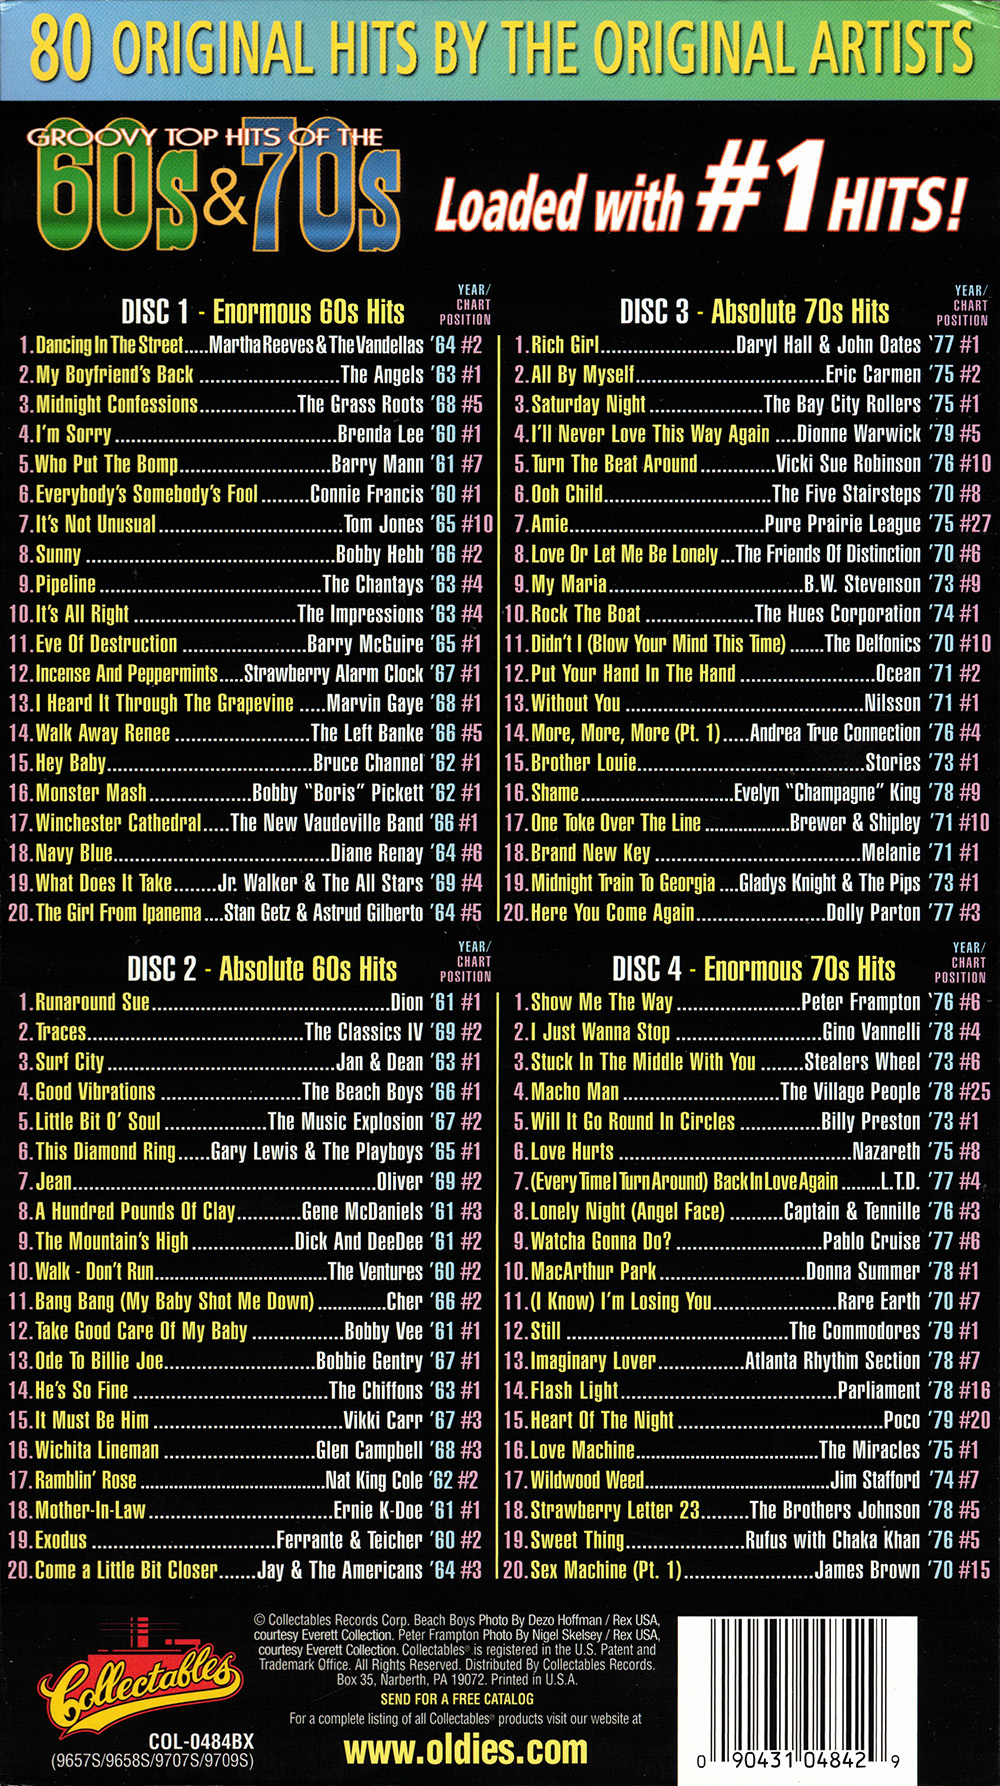 Groovy Top Hits of The 60's & 70's (4 CD) - Click Image to Close